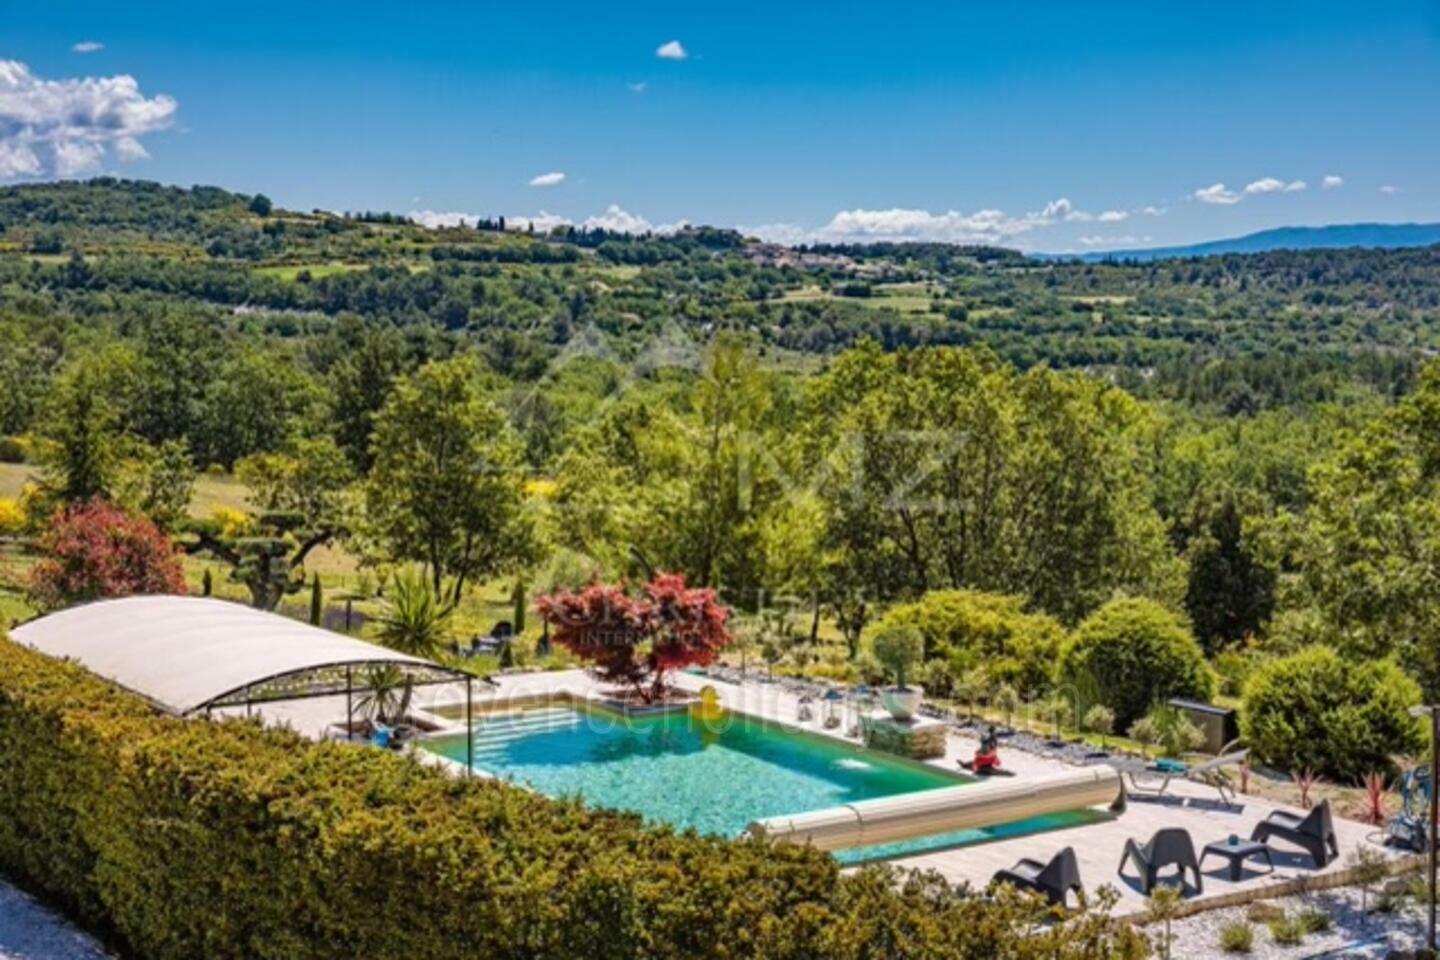 3 - Recently restored bastide with heated swimming pool: Villa: Exterior